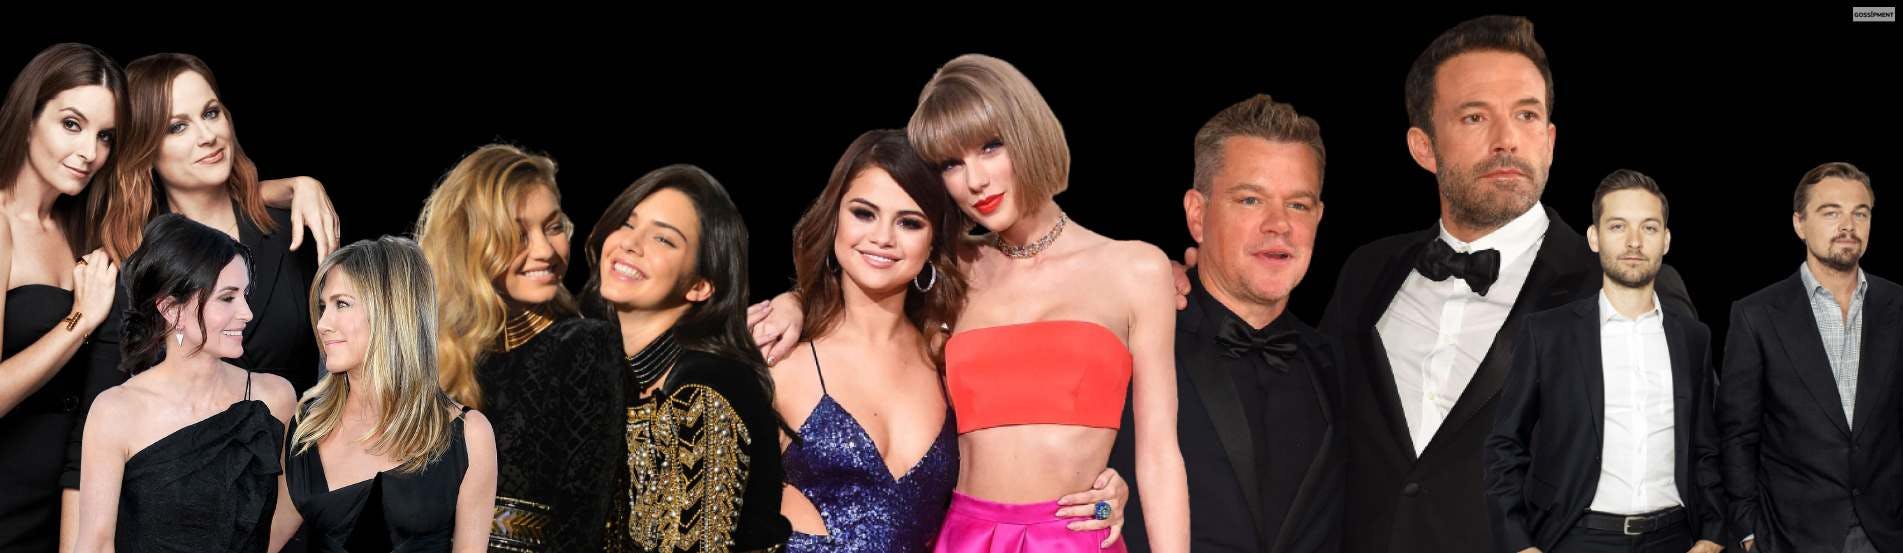 Cover Image for Gossipment’s Fav Celebrity Besties Of All Time: Who’s Your Bestie?